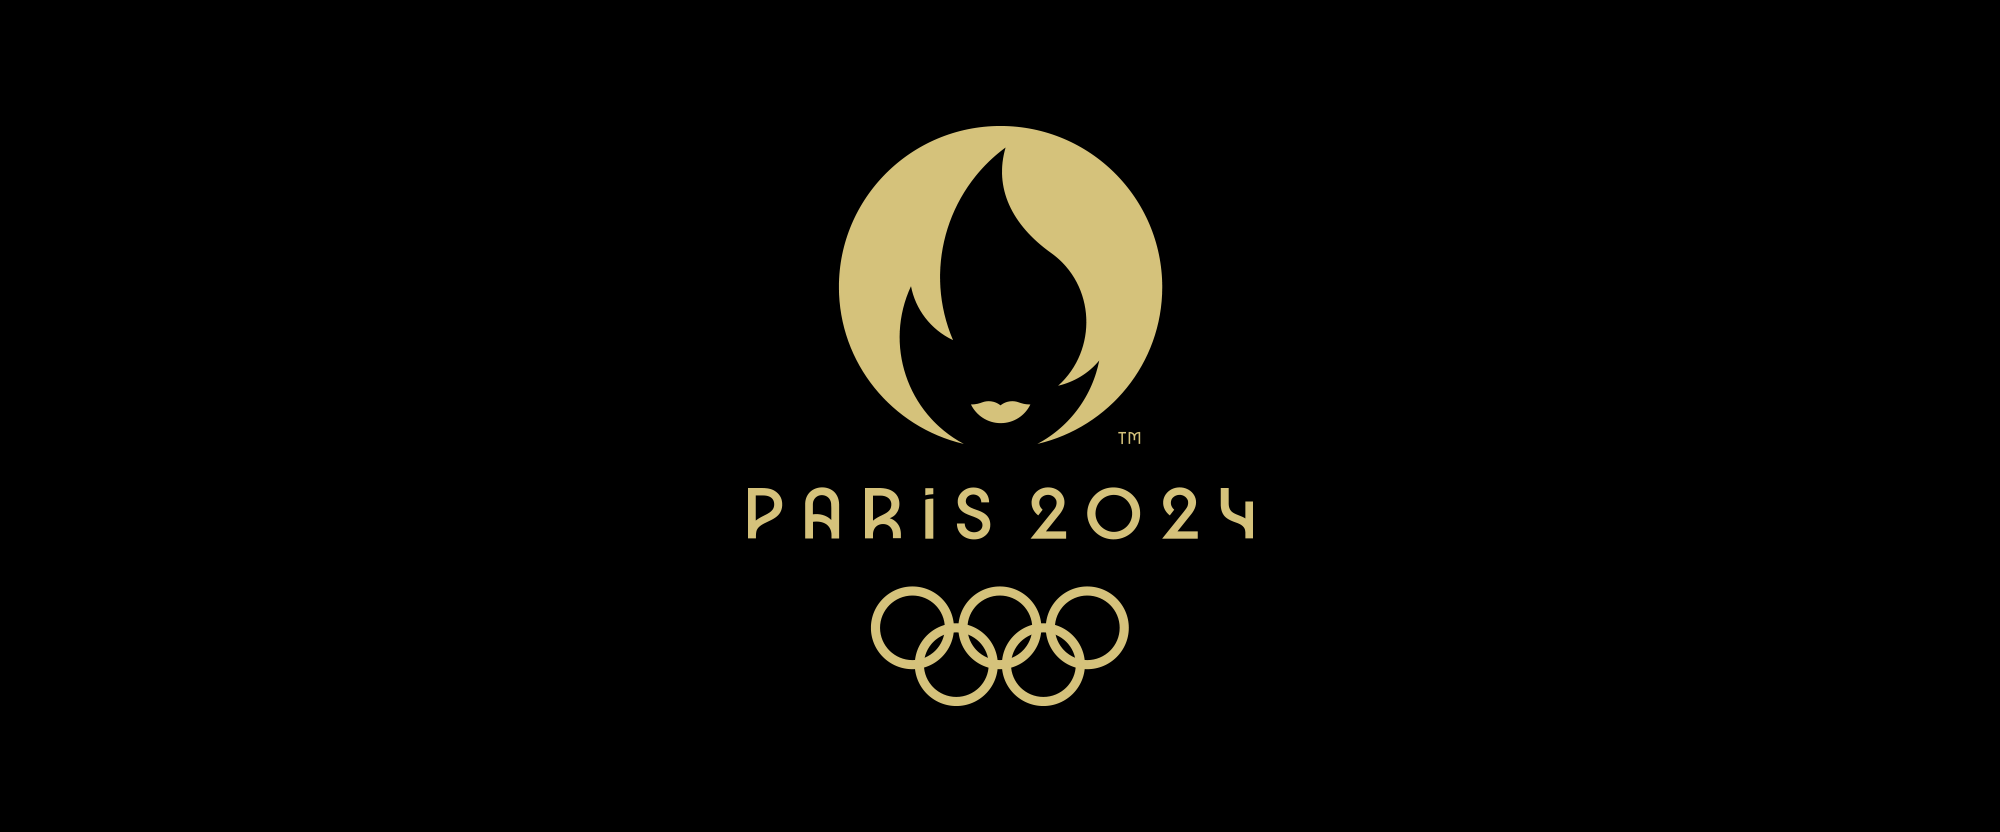 New Emblem for 2024 Summer Olympics by Royalties Ecobranding